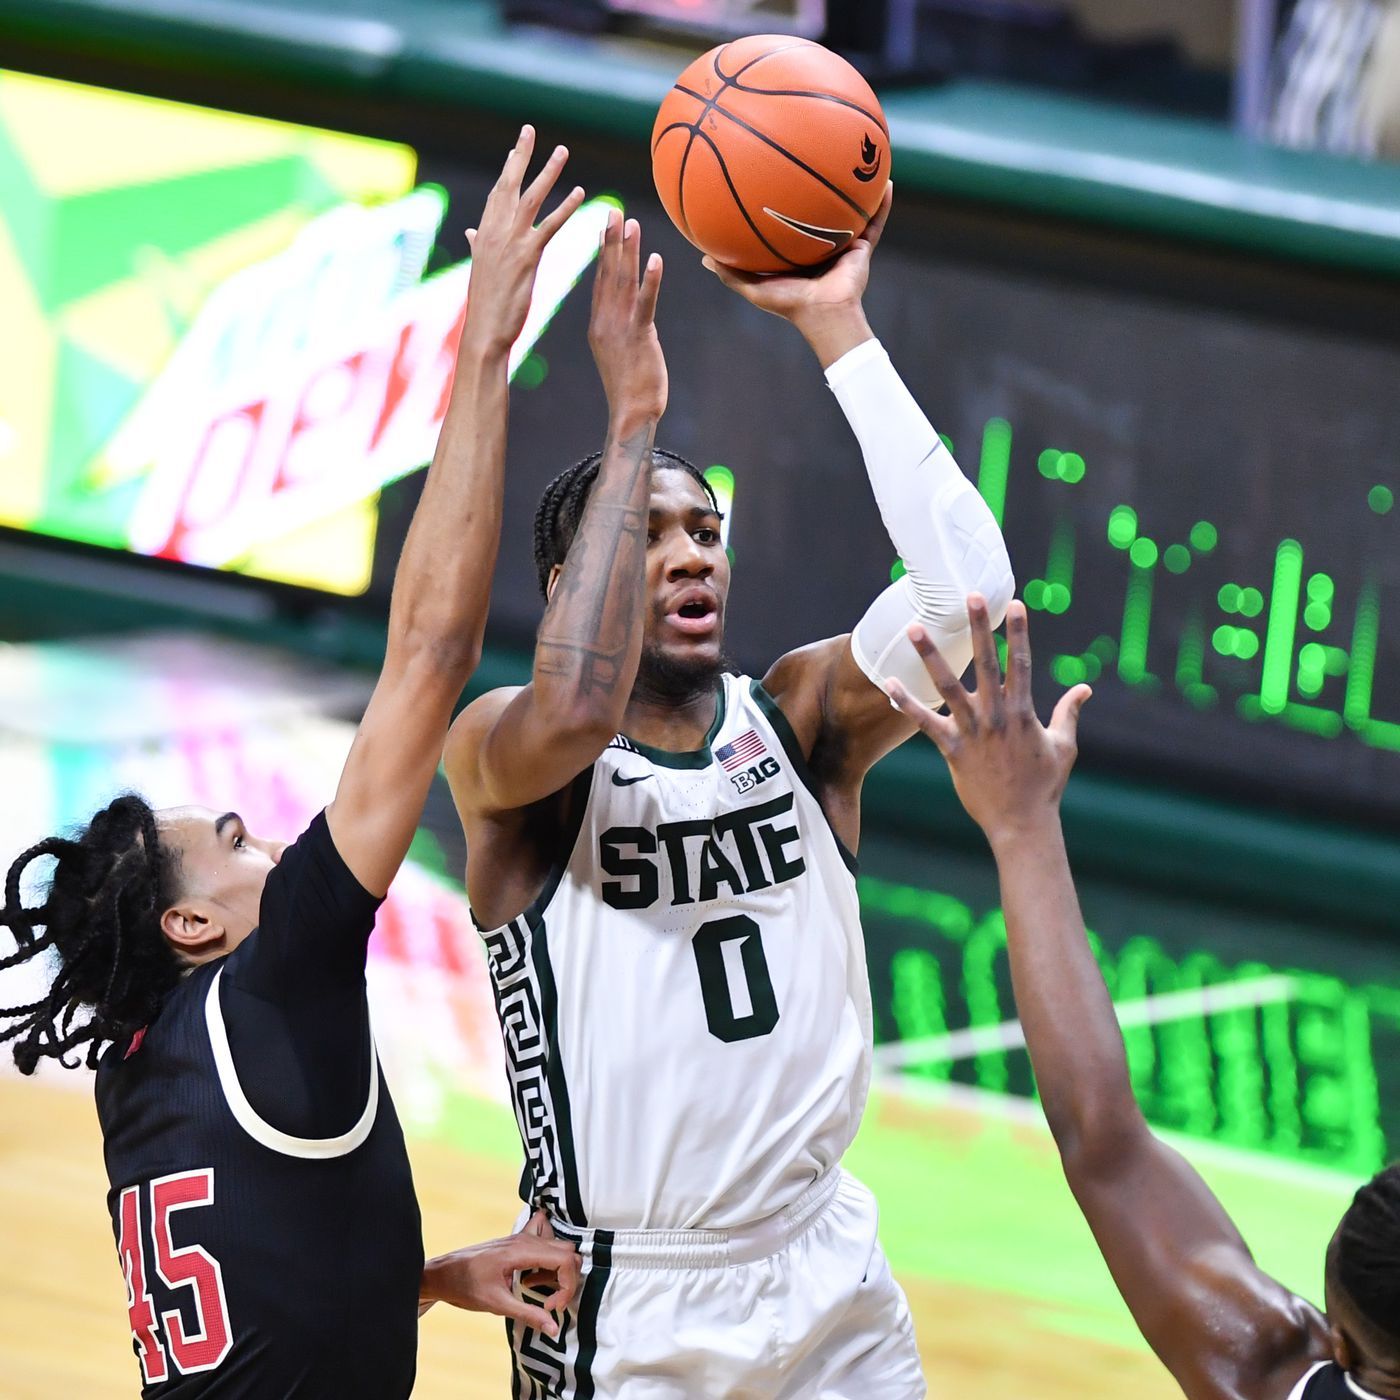 Michigan State Mens Basketball Schedule 2022 23 Michigan State Men's Basketball: 2021-'22 Tv Schedule Released - The Only  Colors